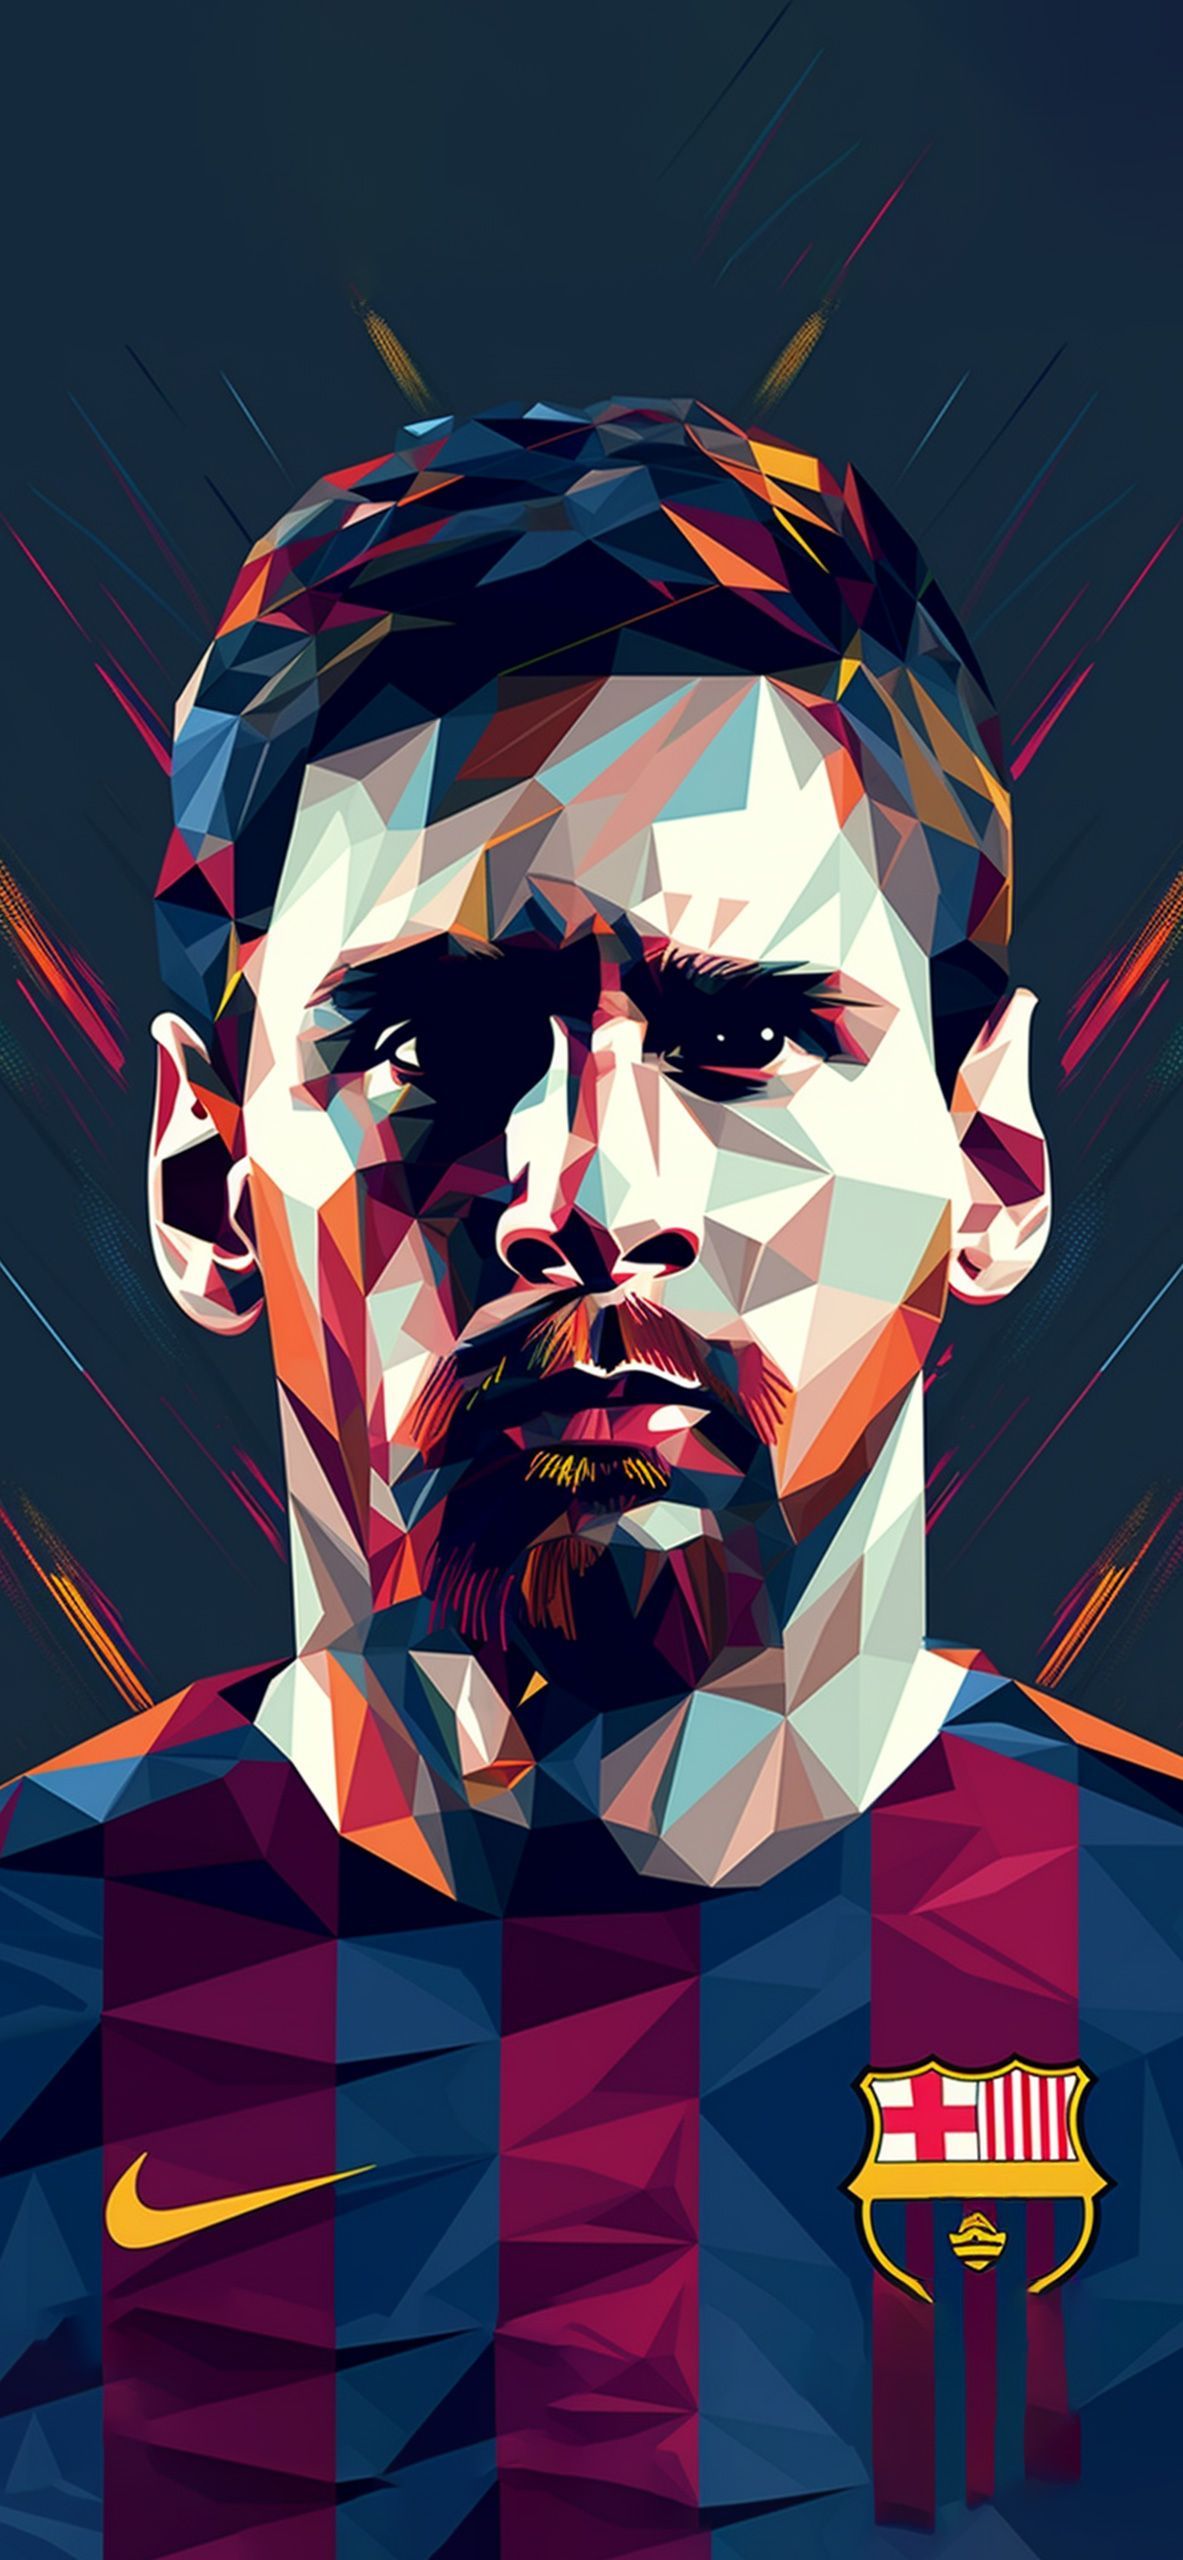 Lionel Messi iPhone Wallpaper with high-resolution 1080x1920 pixel. You can use this wallpaper for your iPhone 5, 6, 7, 8, X, XS, XR backgrounds, Mobile Screensaver, or iPad Lock Screen - Messi